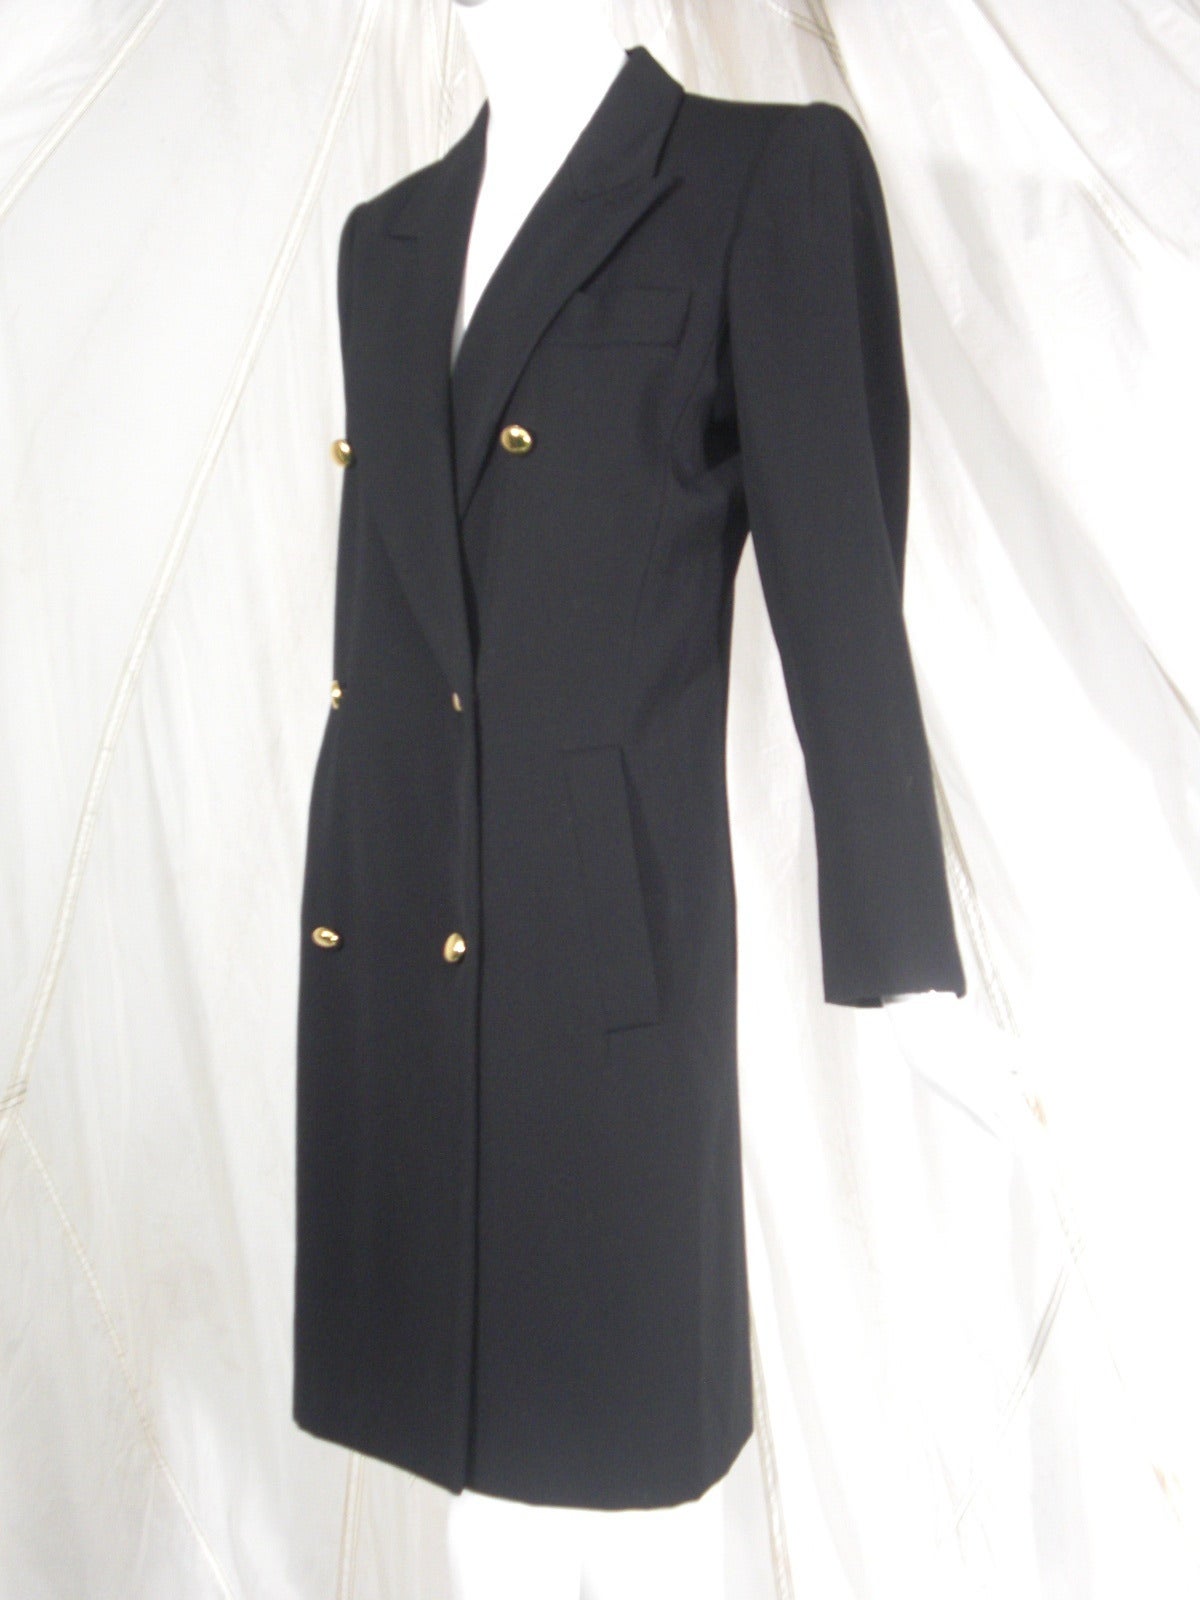 1980s Saint Laurent Rive Gauche Black Double Breasted Coat

Slim Silhouette with Strong Shoulder

Classic Brass Buttons